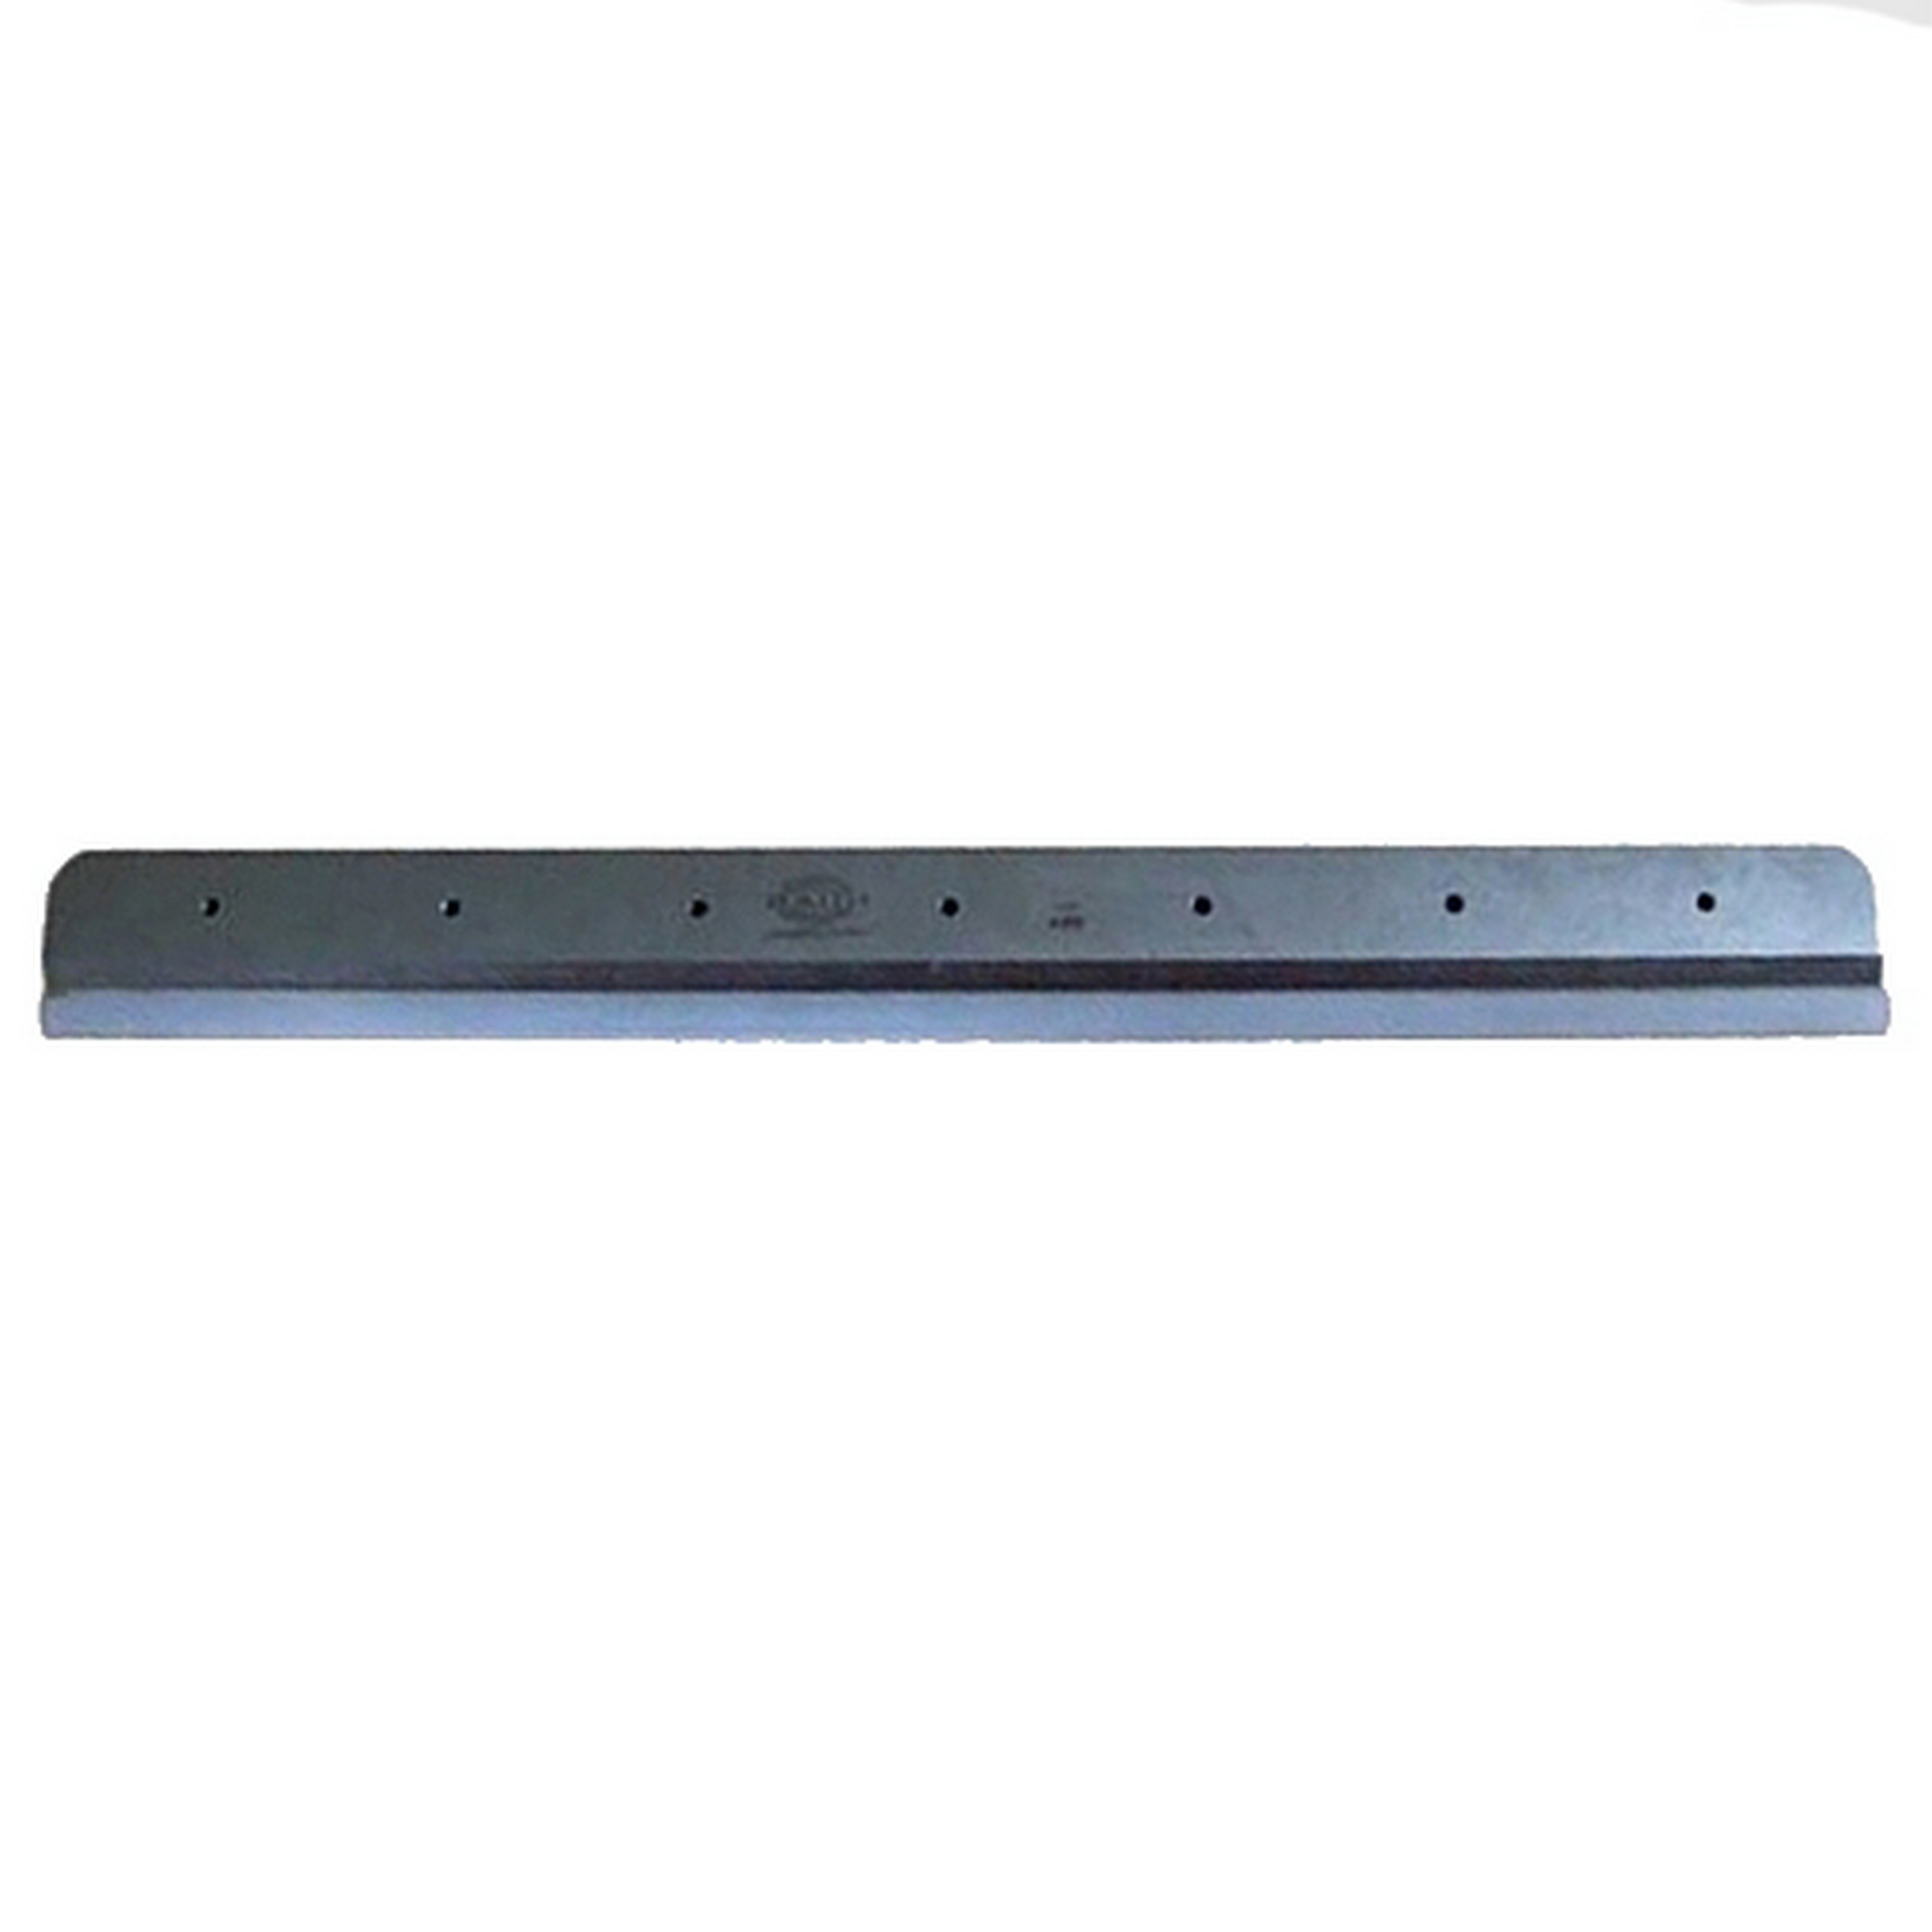 Spare blade for guillotines - Type  4700, 4705, 4810, 4815, 4850, 4855, 4860...